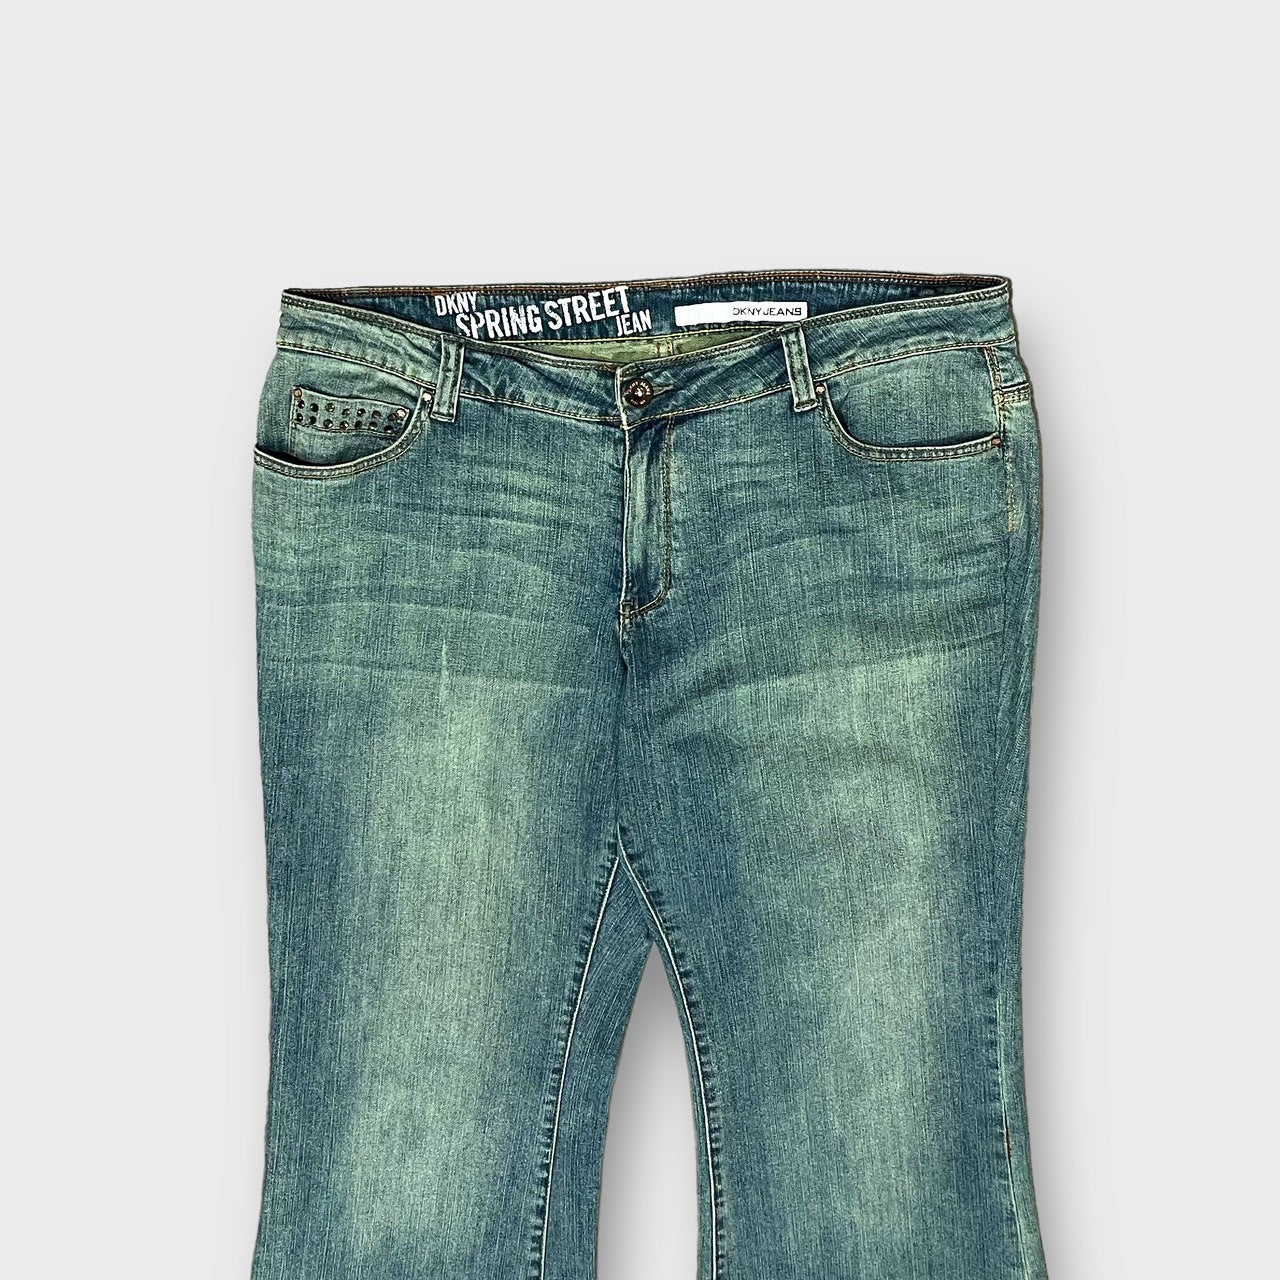 00’s DKNY JEANS buggy flare denim